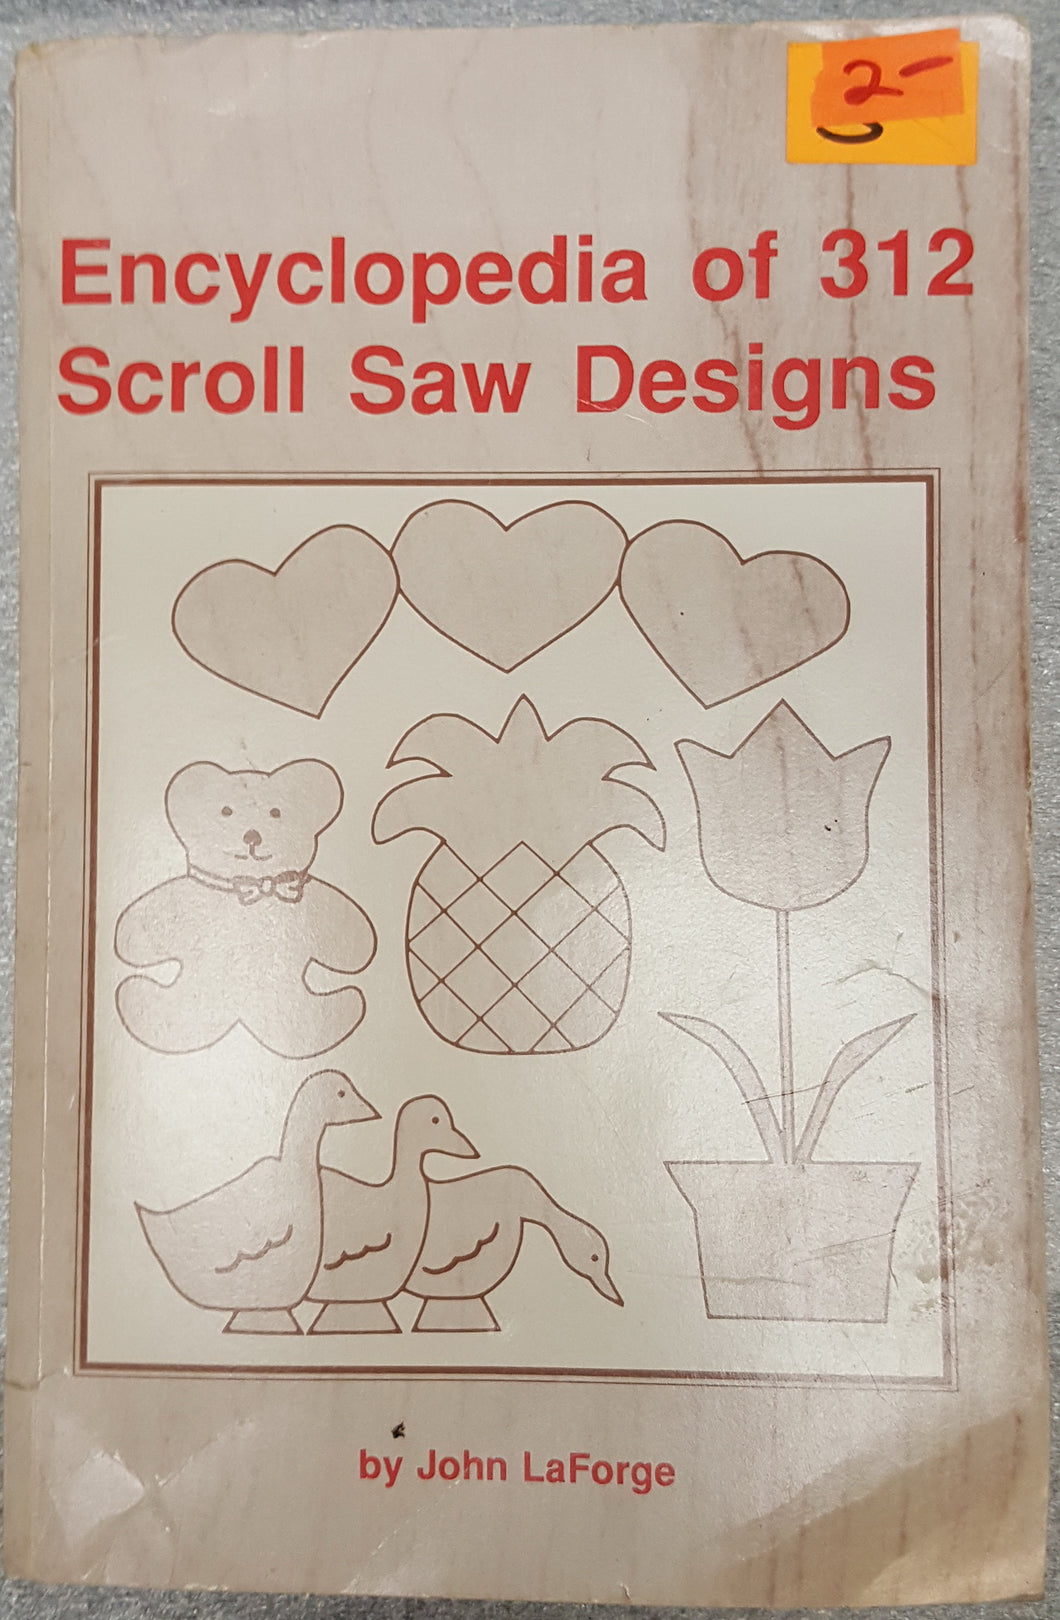 Encyclopedia of 312 Scroll Saw Designs Book by John LaForge